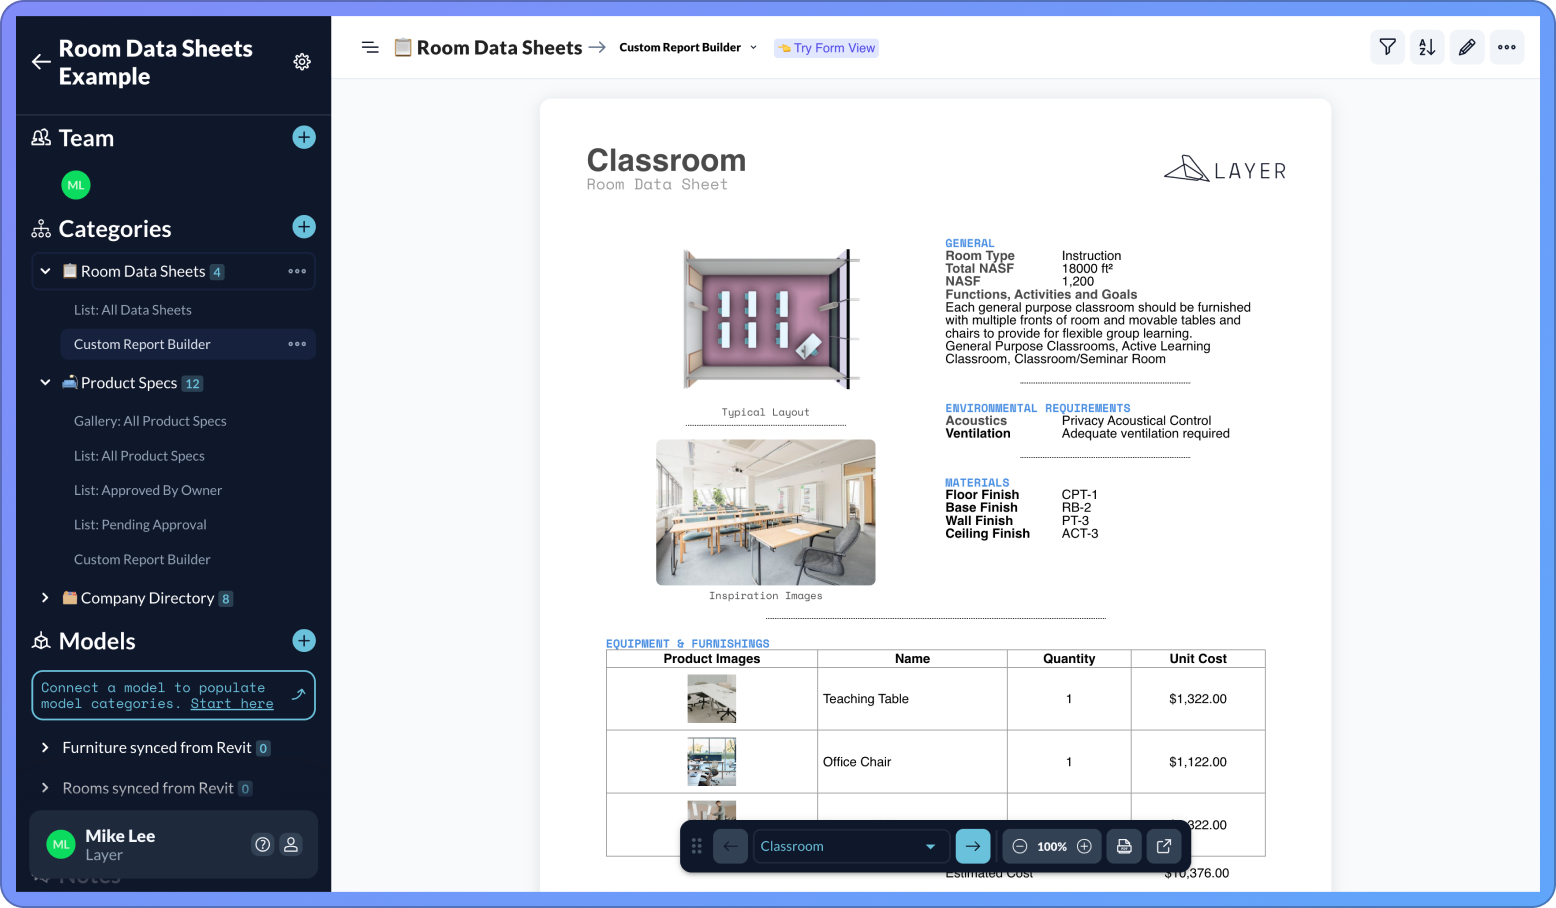 Room Data Sheets Document View